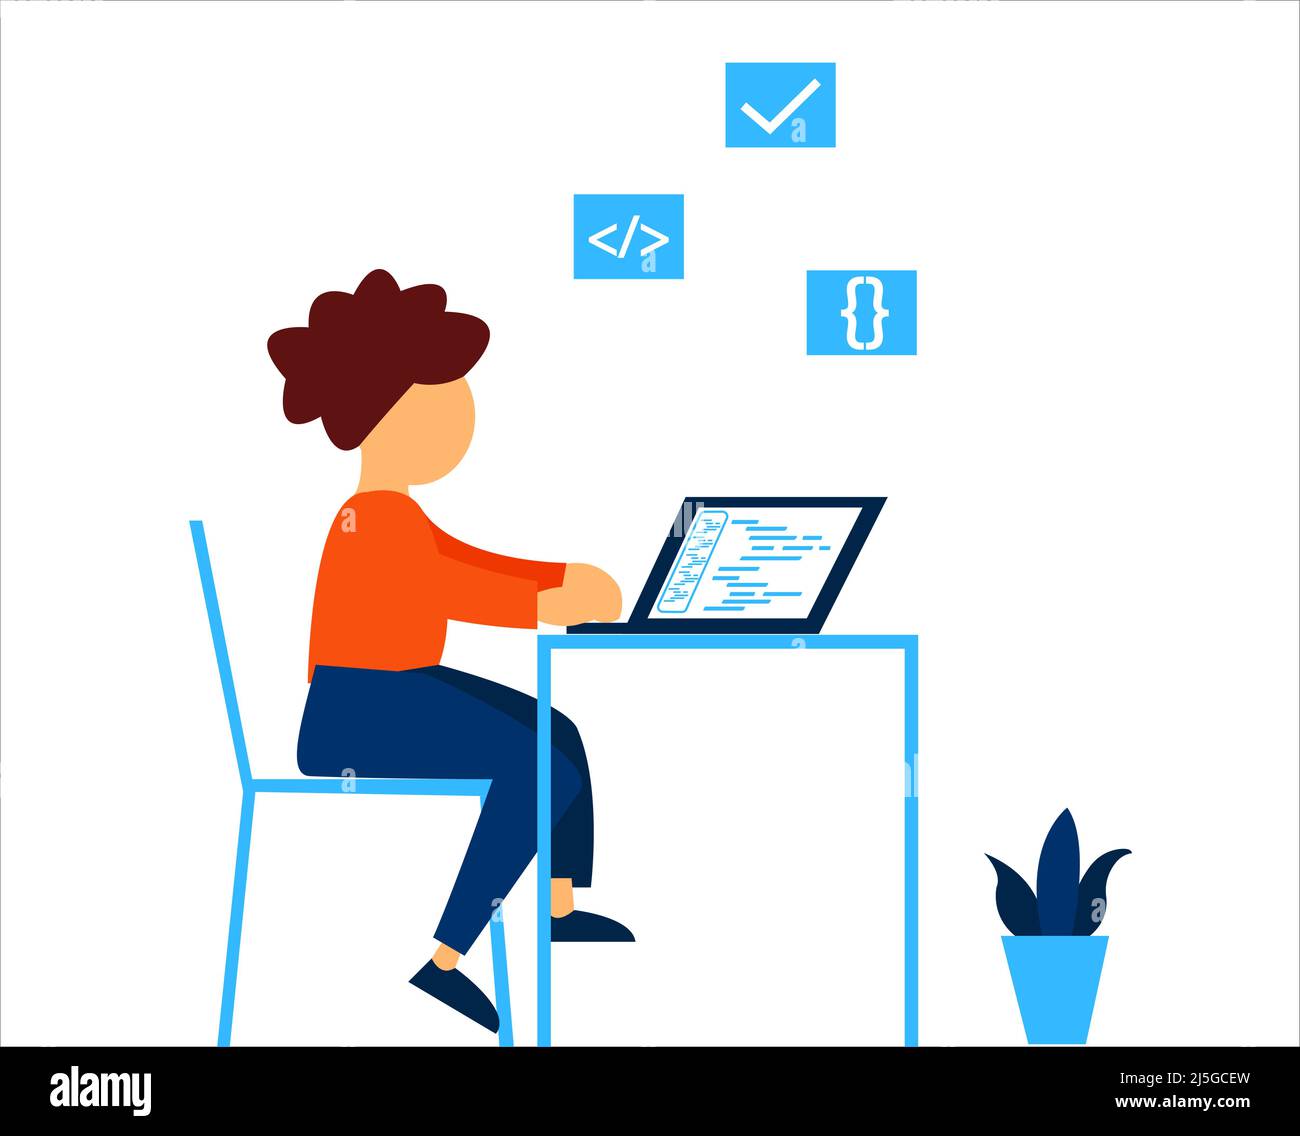 A small boy learning programming language Stock Vector